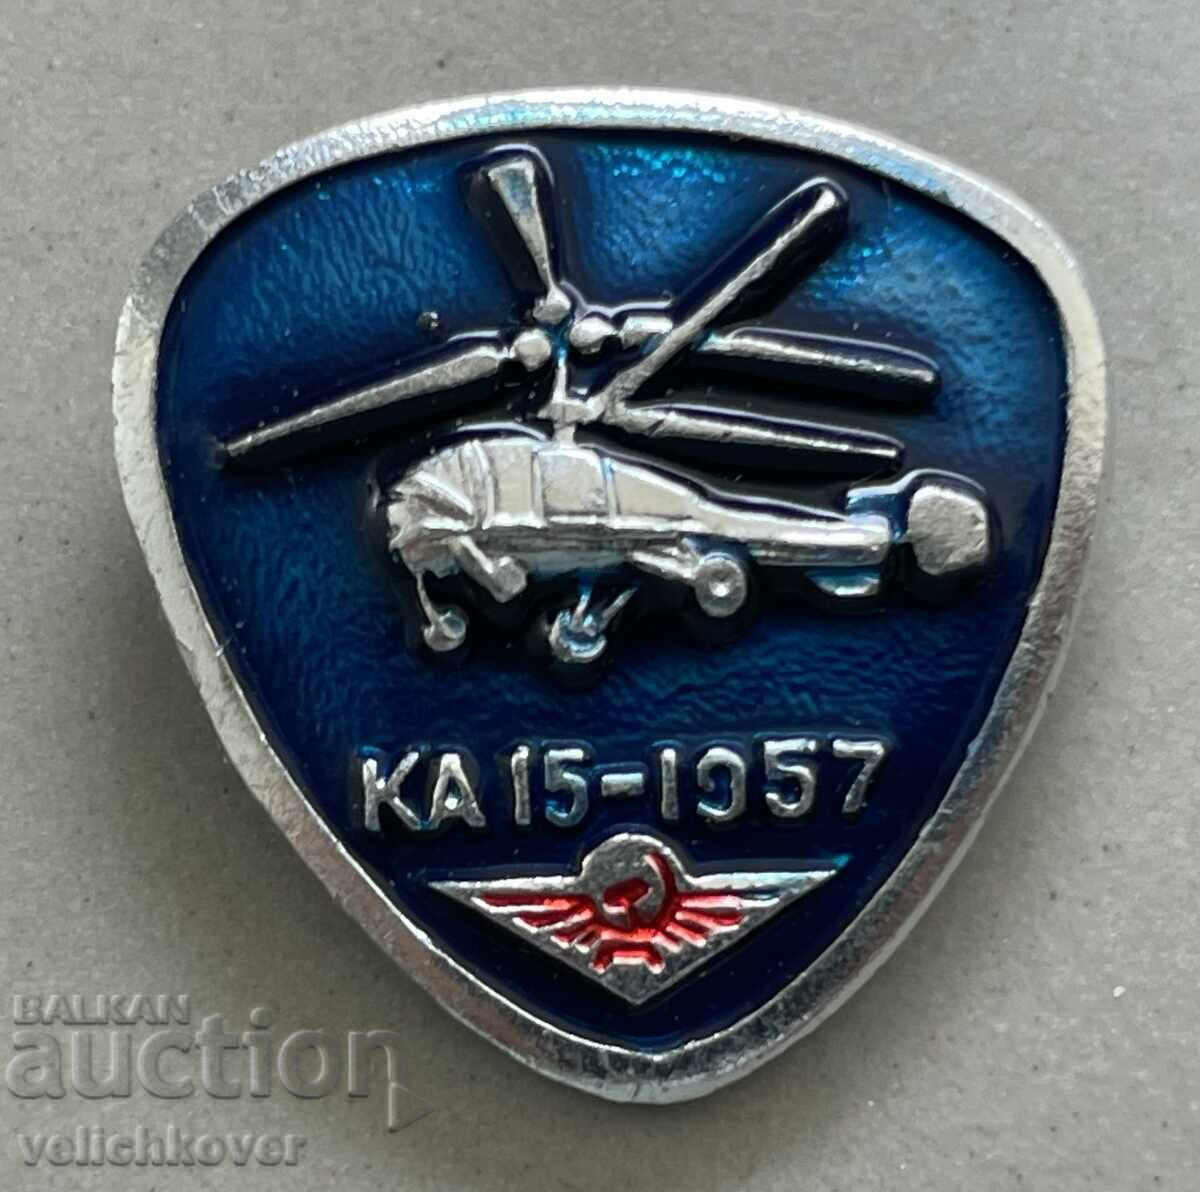 35371 USSR sign helicopters KA 15 from 1957.